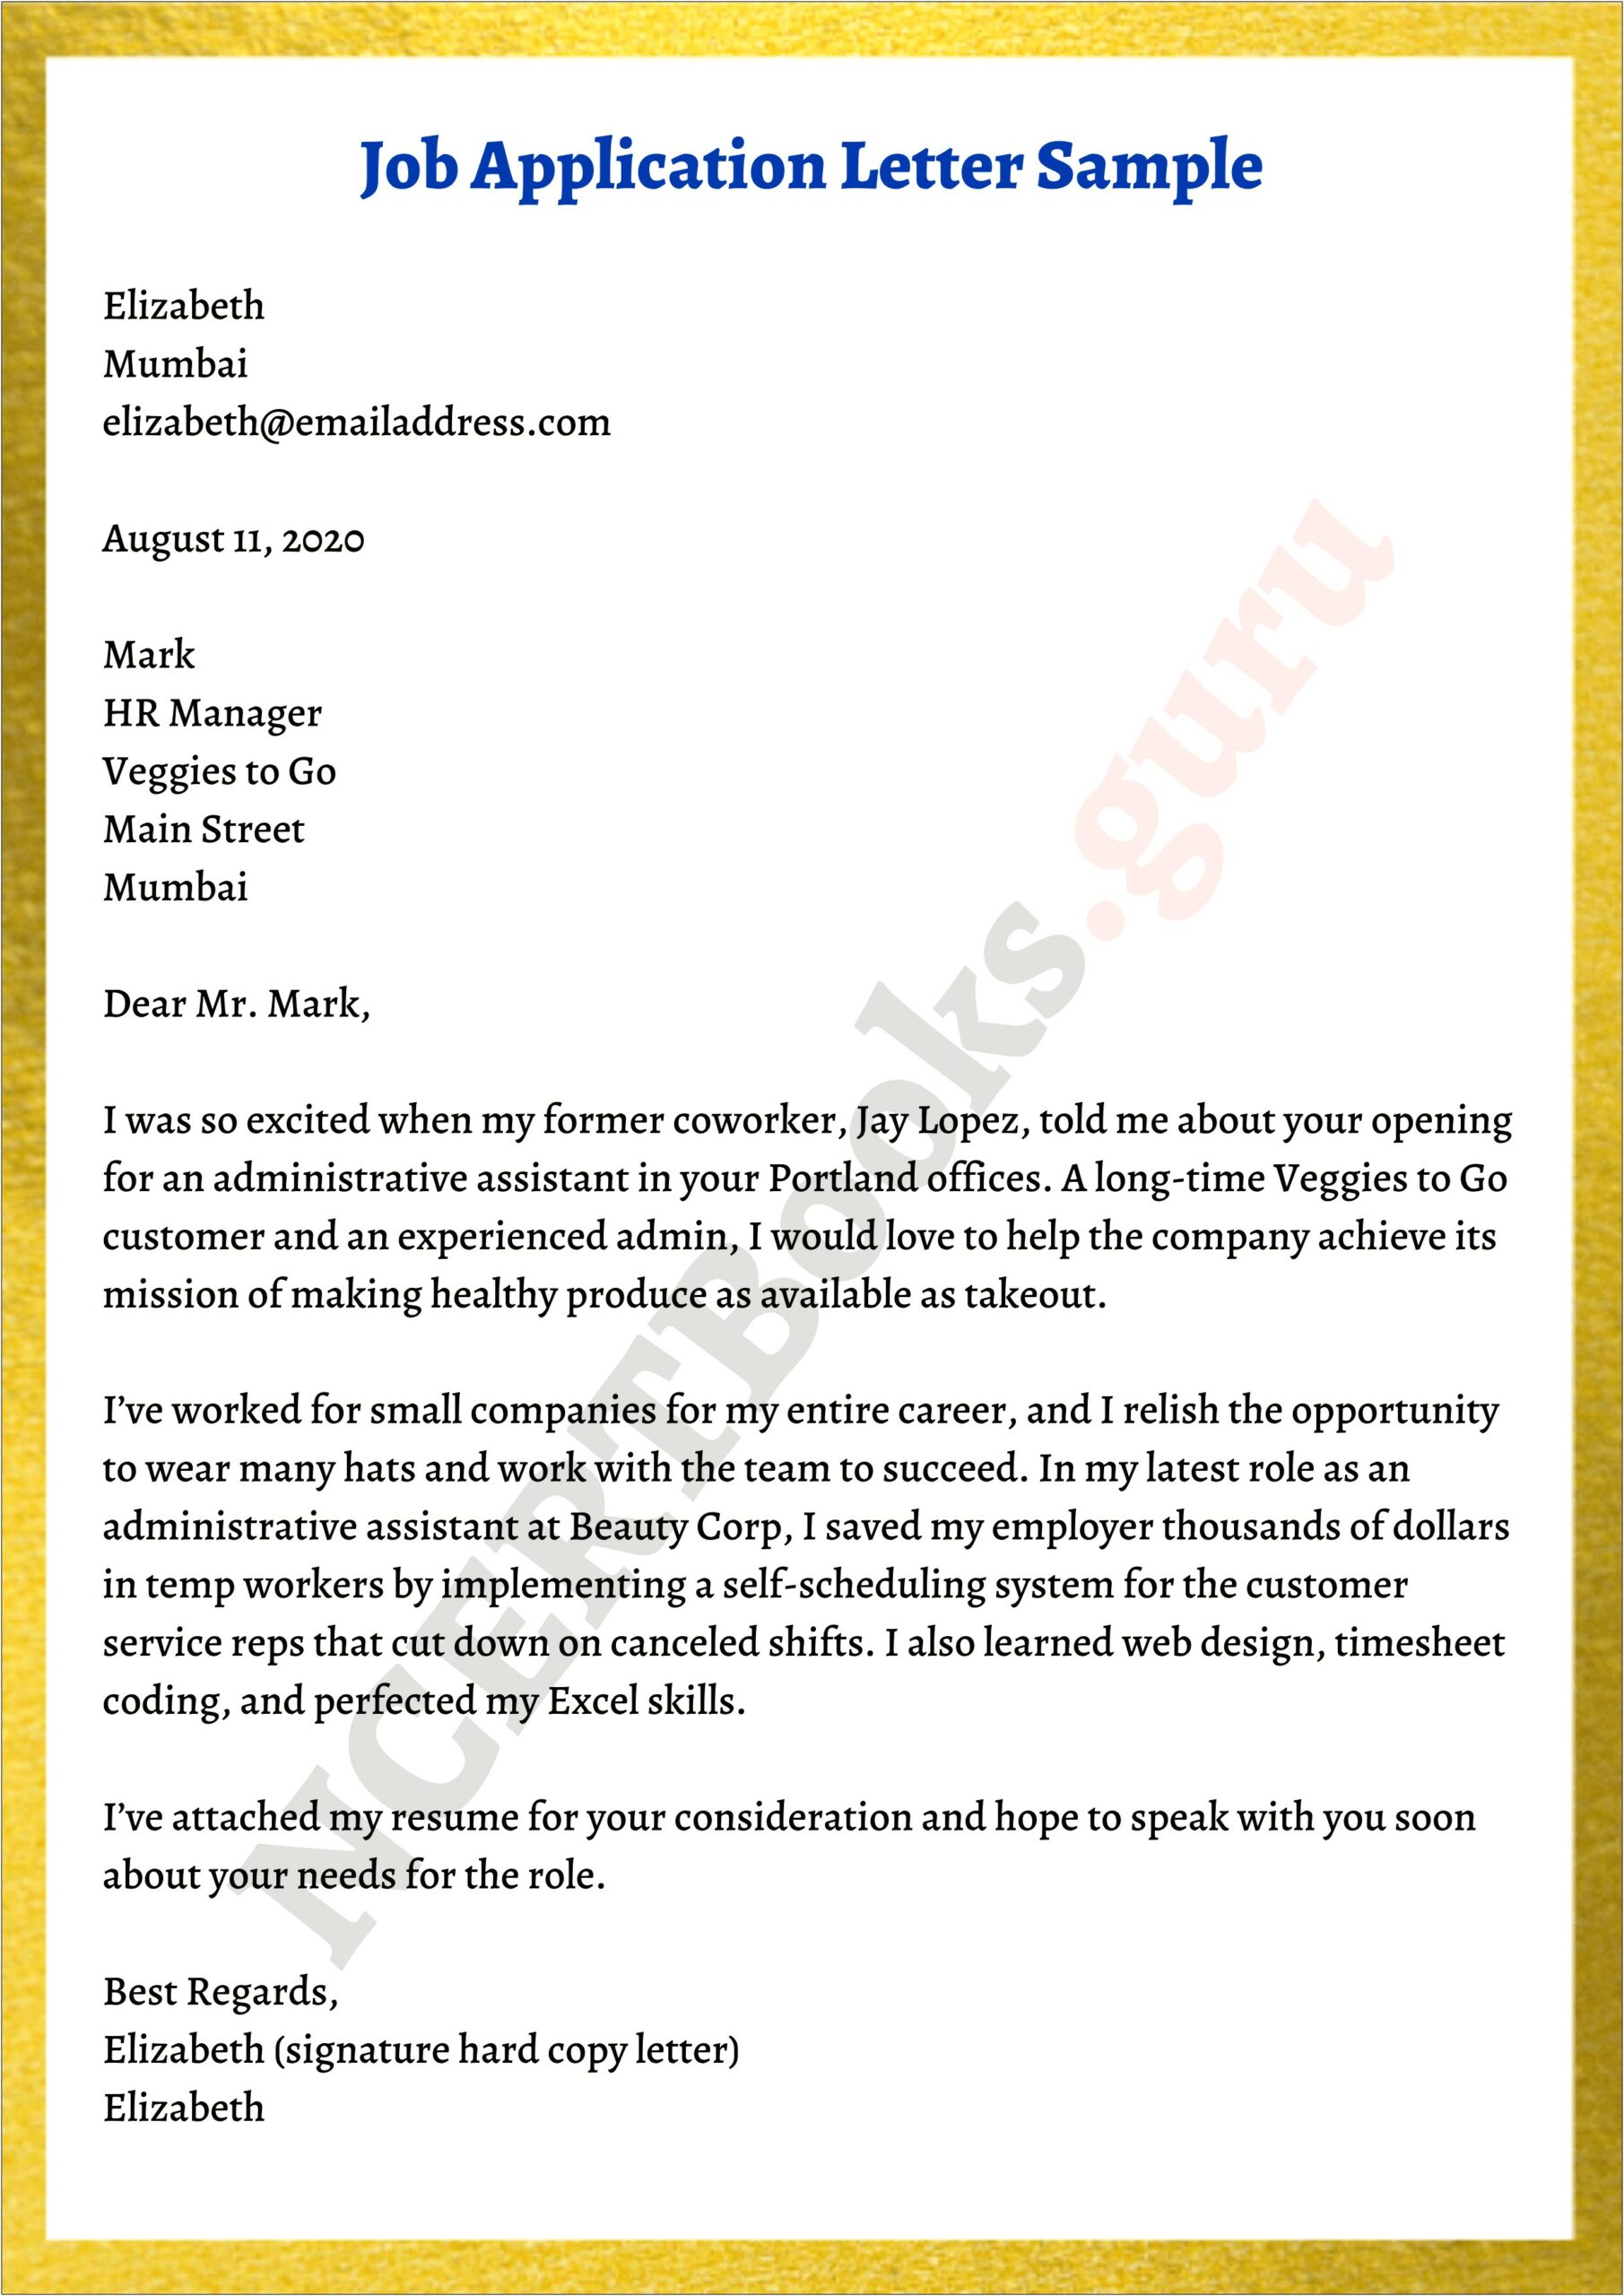 Job Application Letter And Resume Writing